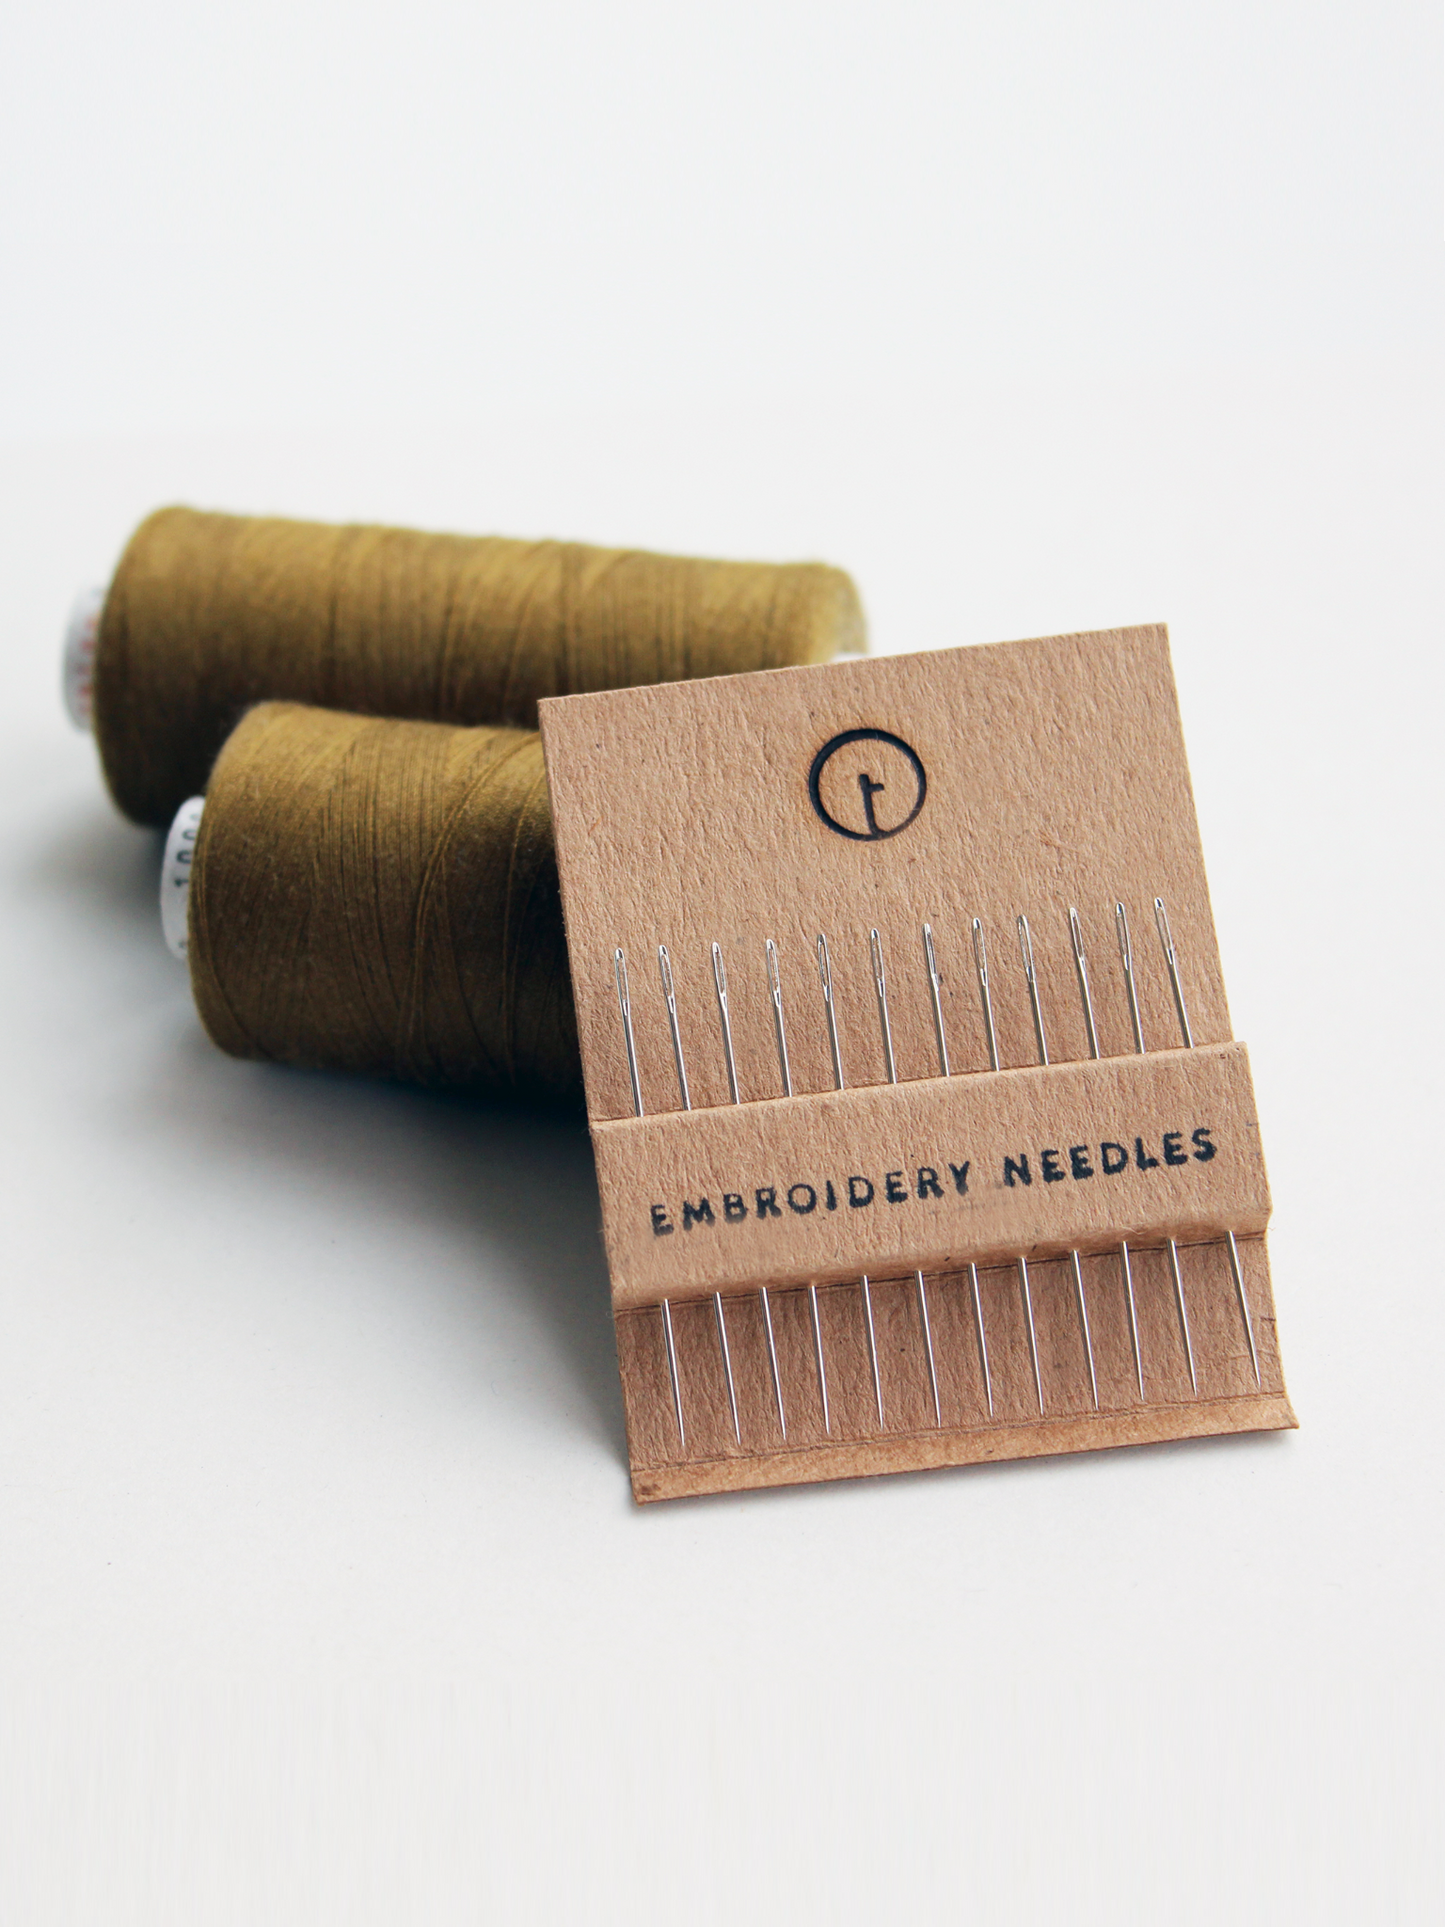 Embroidery Needles - Sharpes Needles with long eye